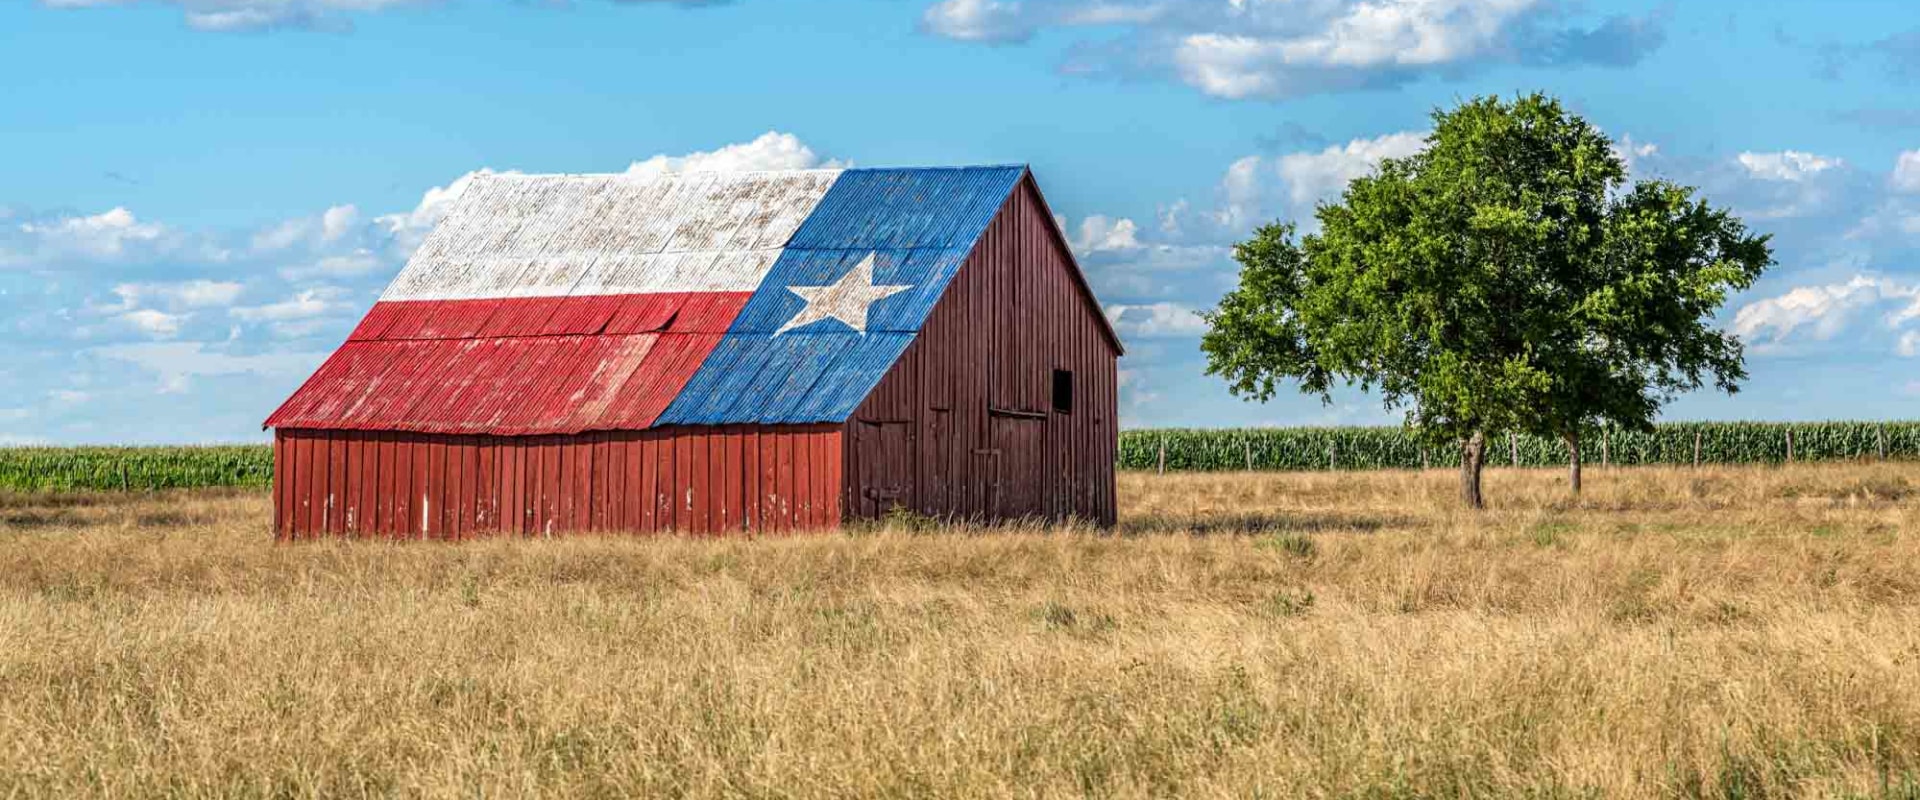 5 Weird and Fascinating Facts About Texas